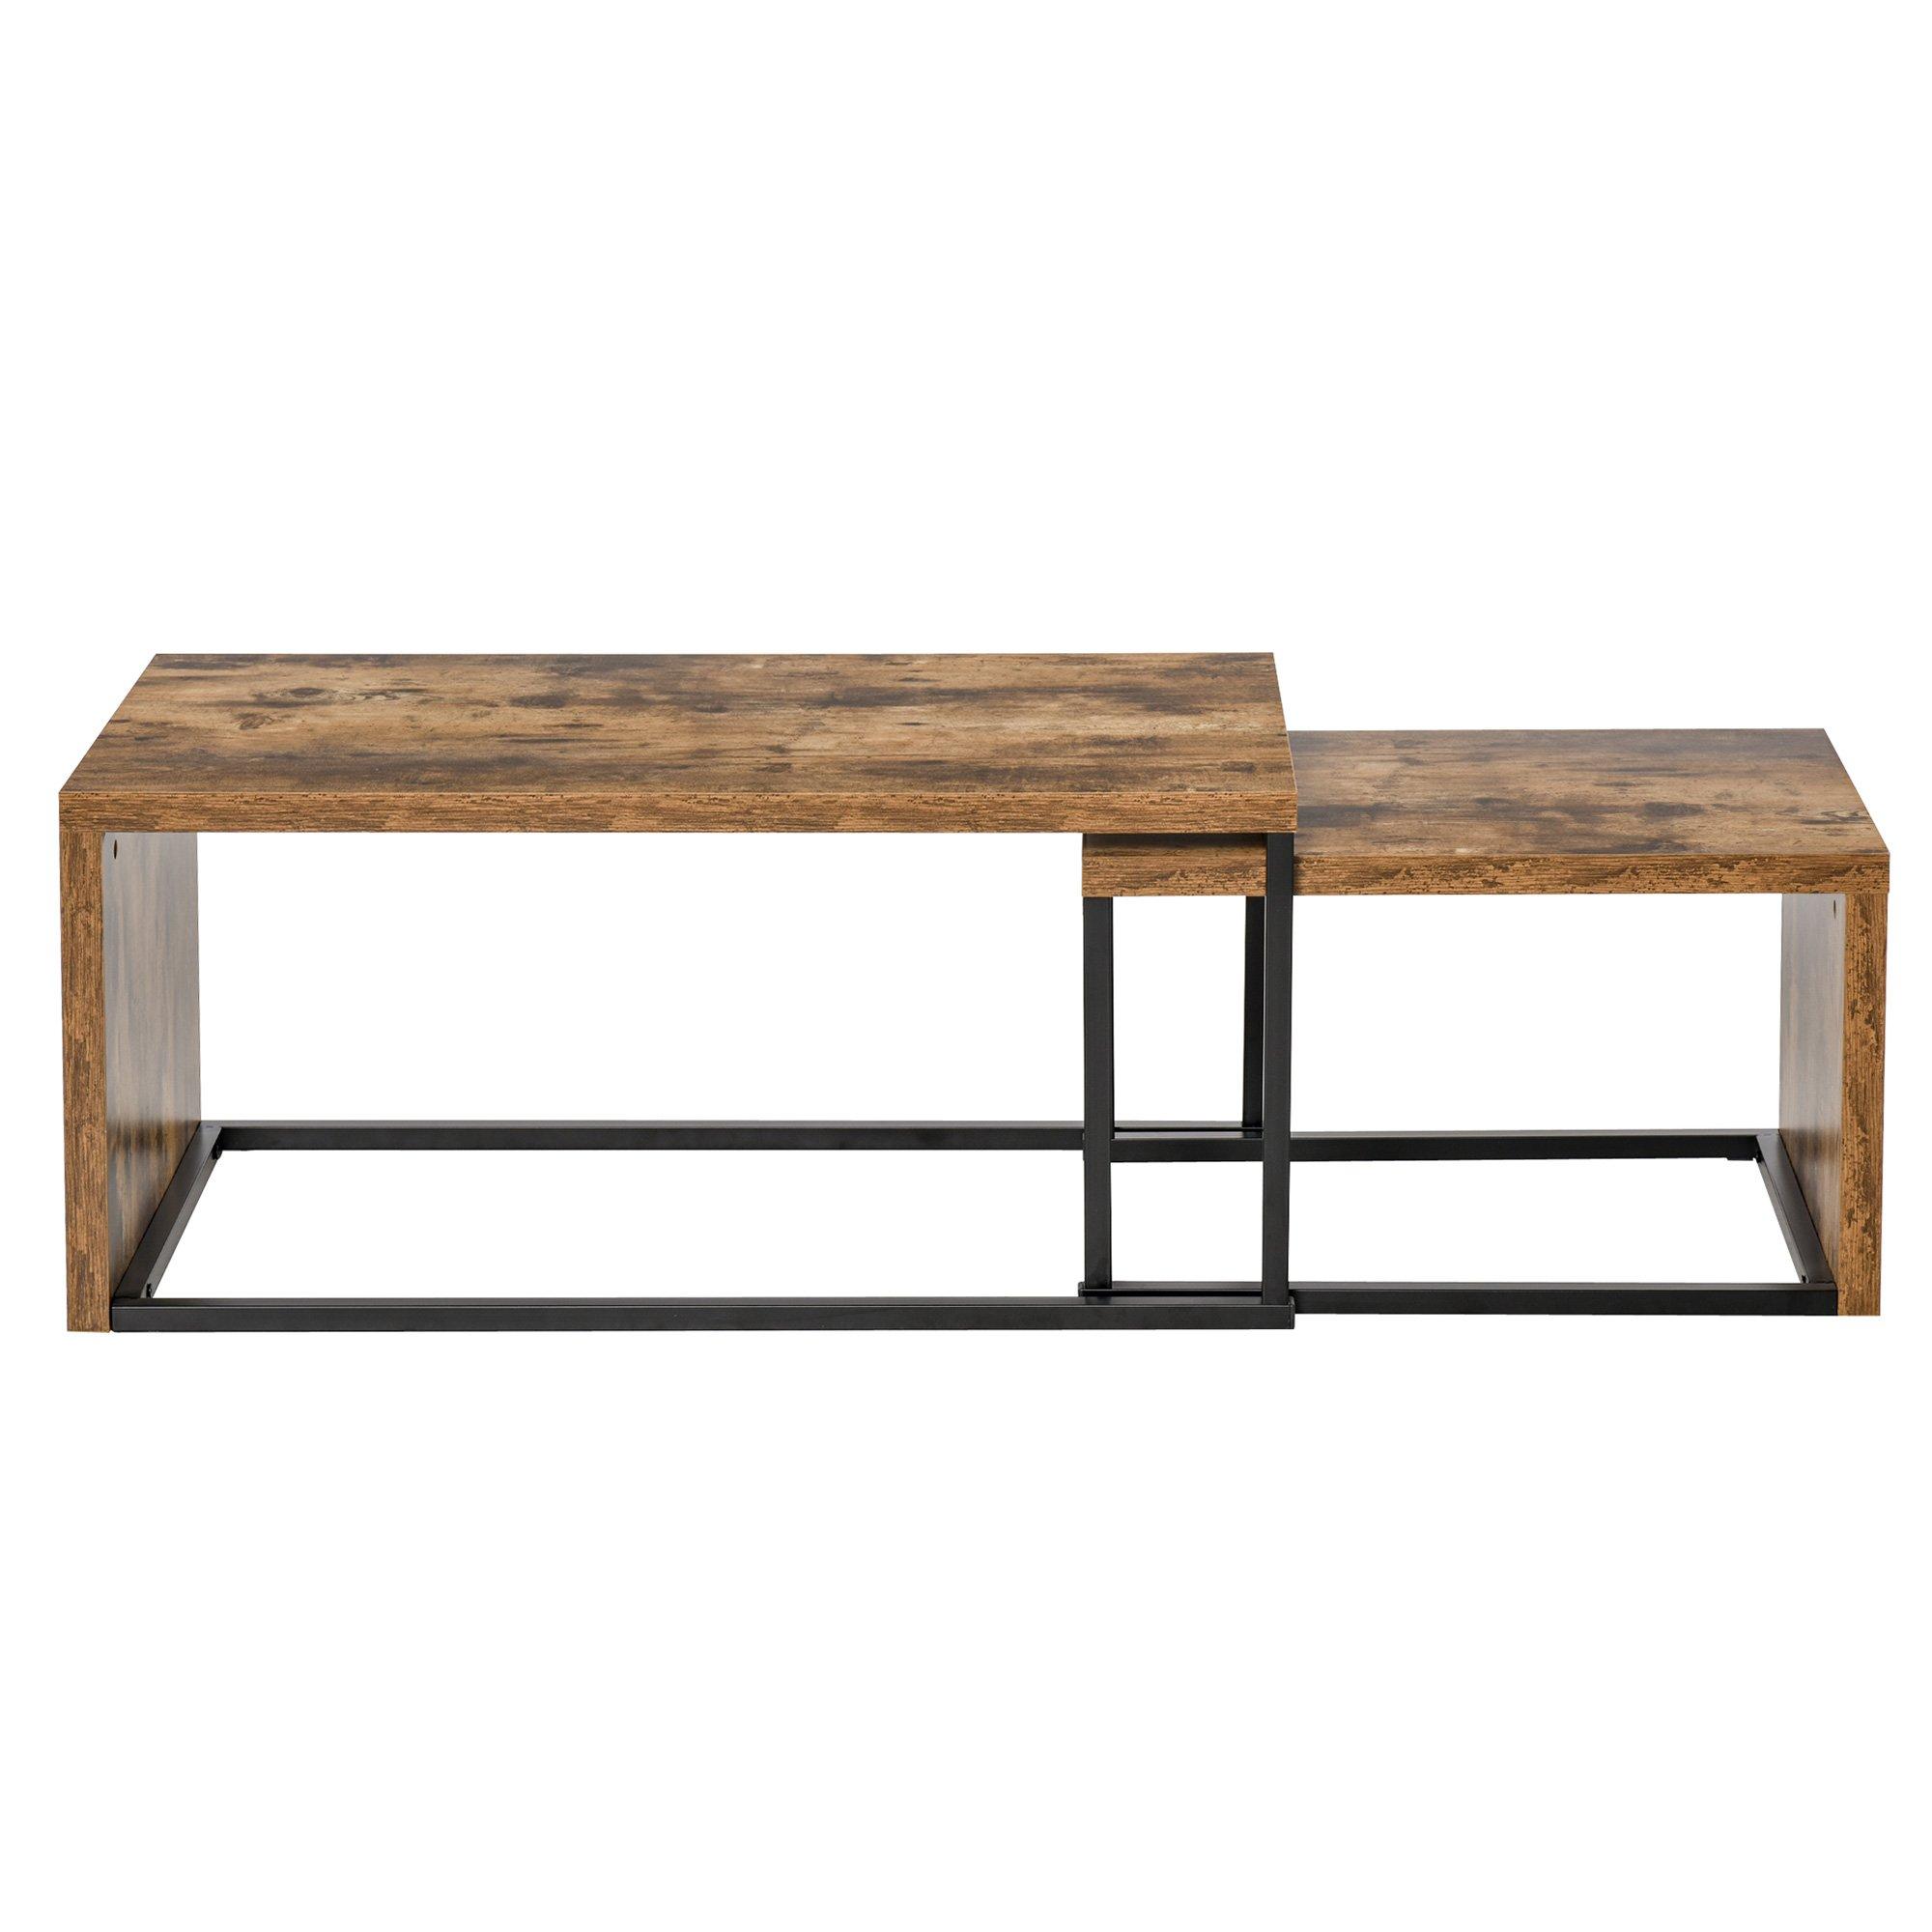 2 Pieces Coffee Tables Set Industrial Style Side Table Living Room